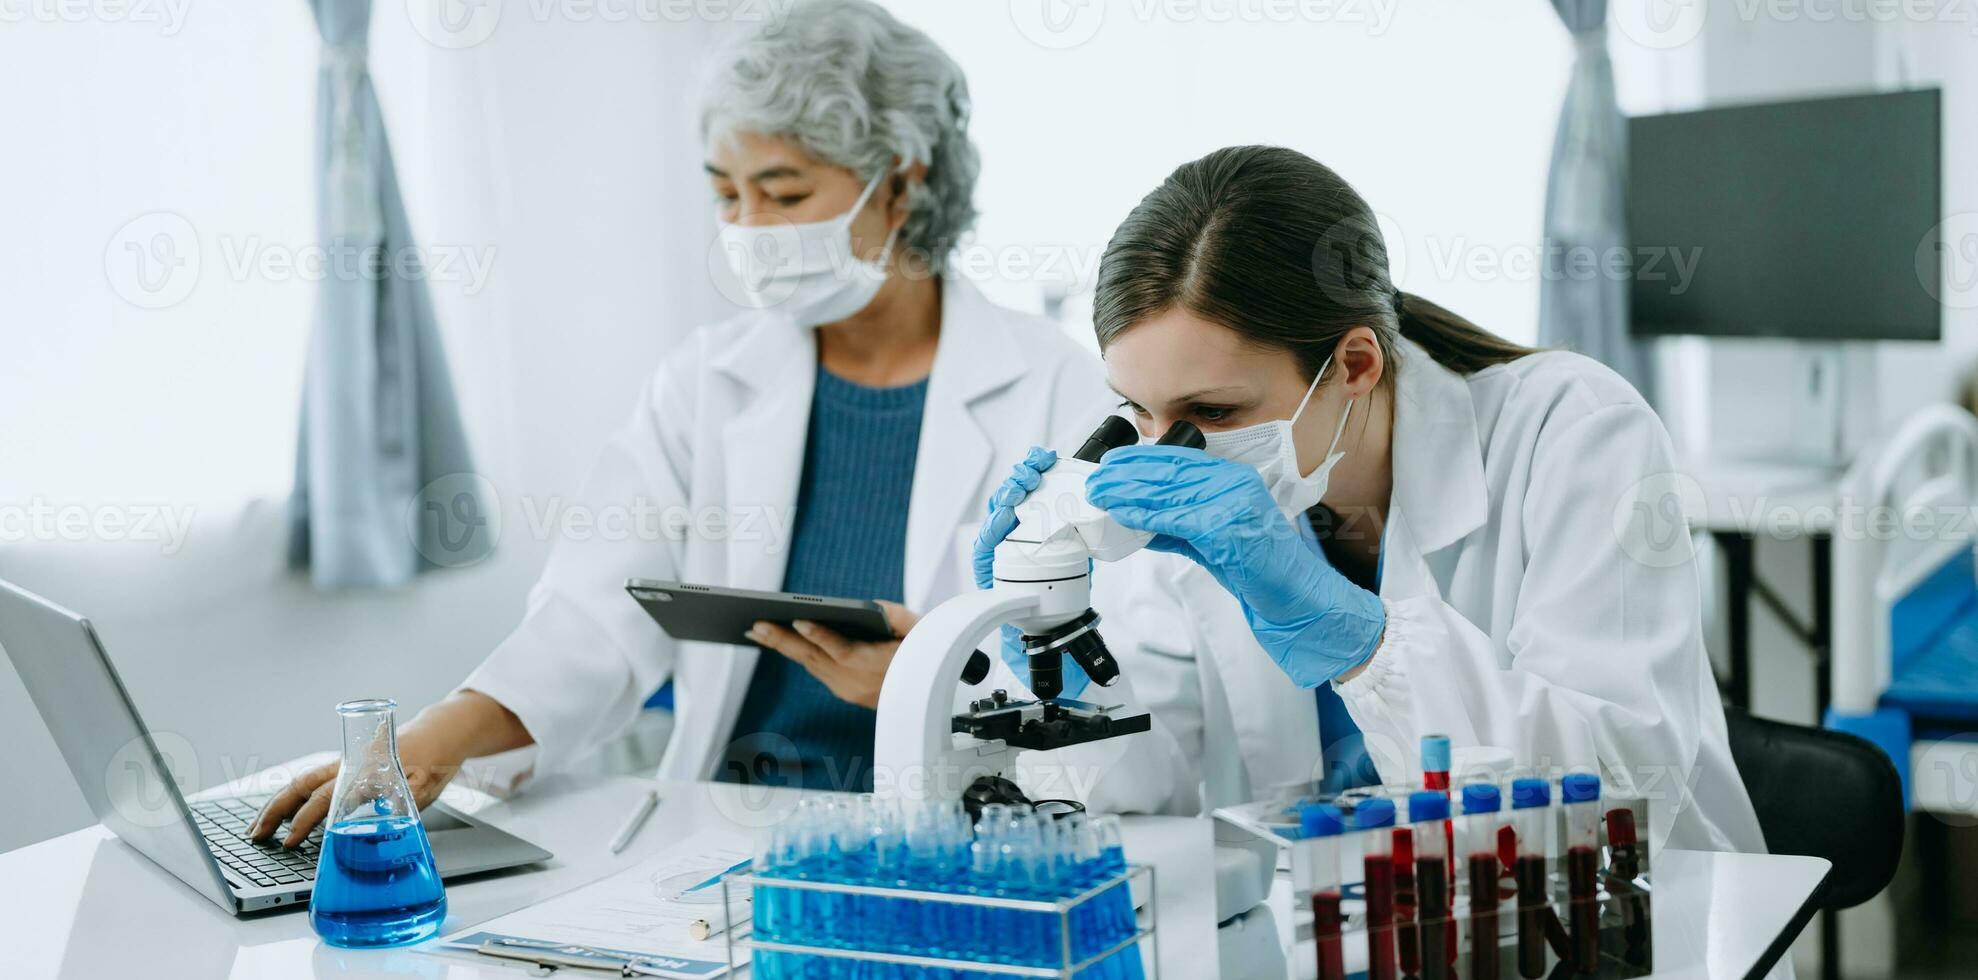 Two scientist or medical technician working, having a medical discuss meeting with an Asian senior female scientist supervisor in the laboratory with online reading, test samples and innovation photo